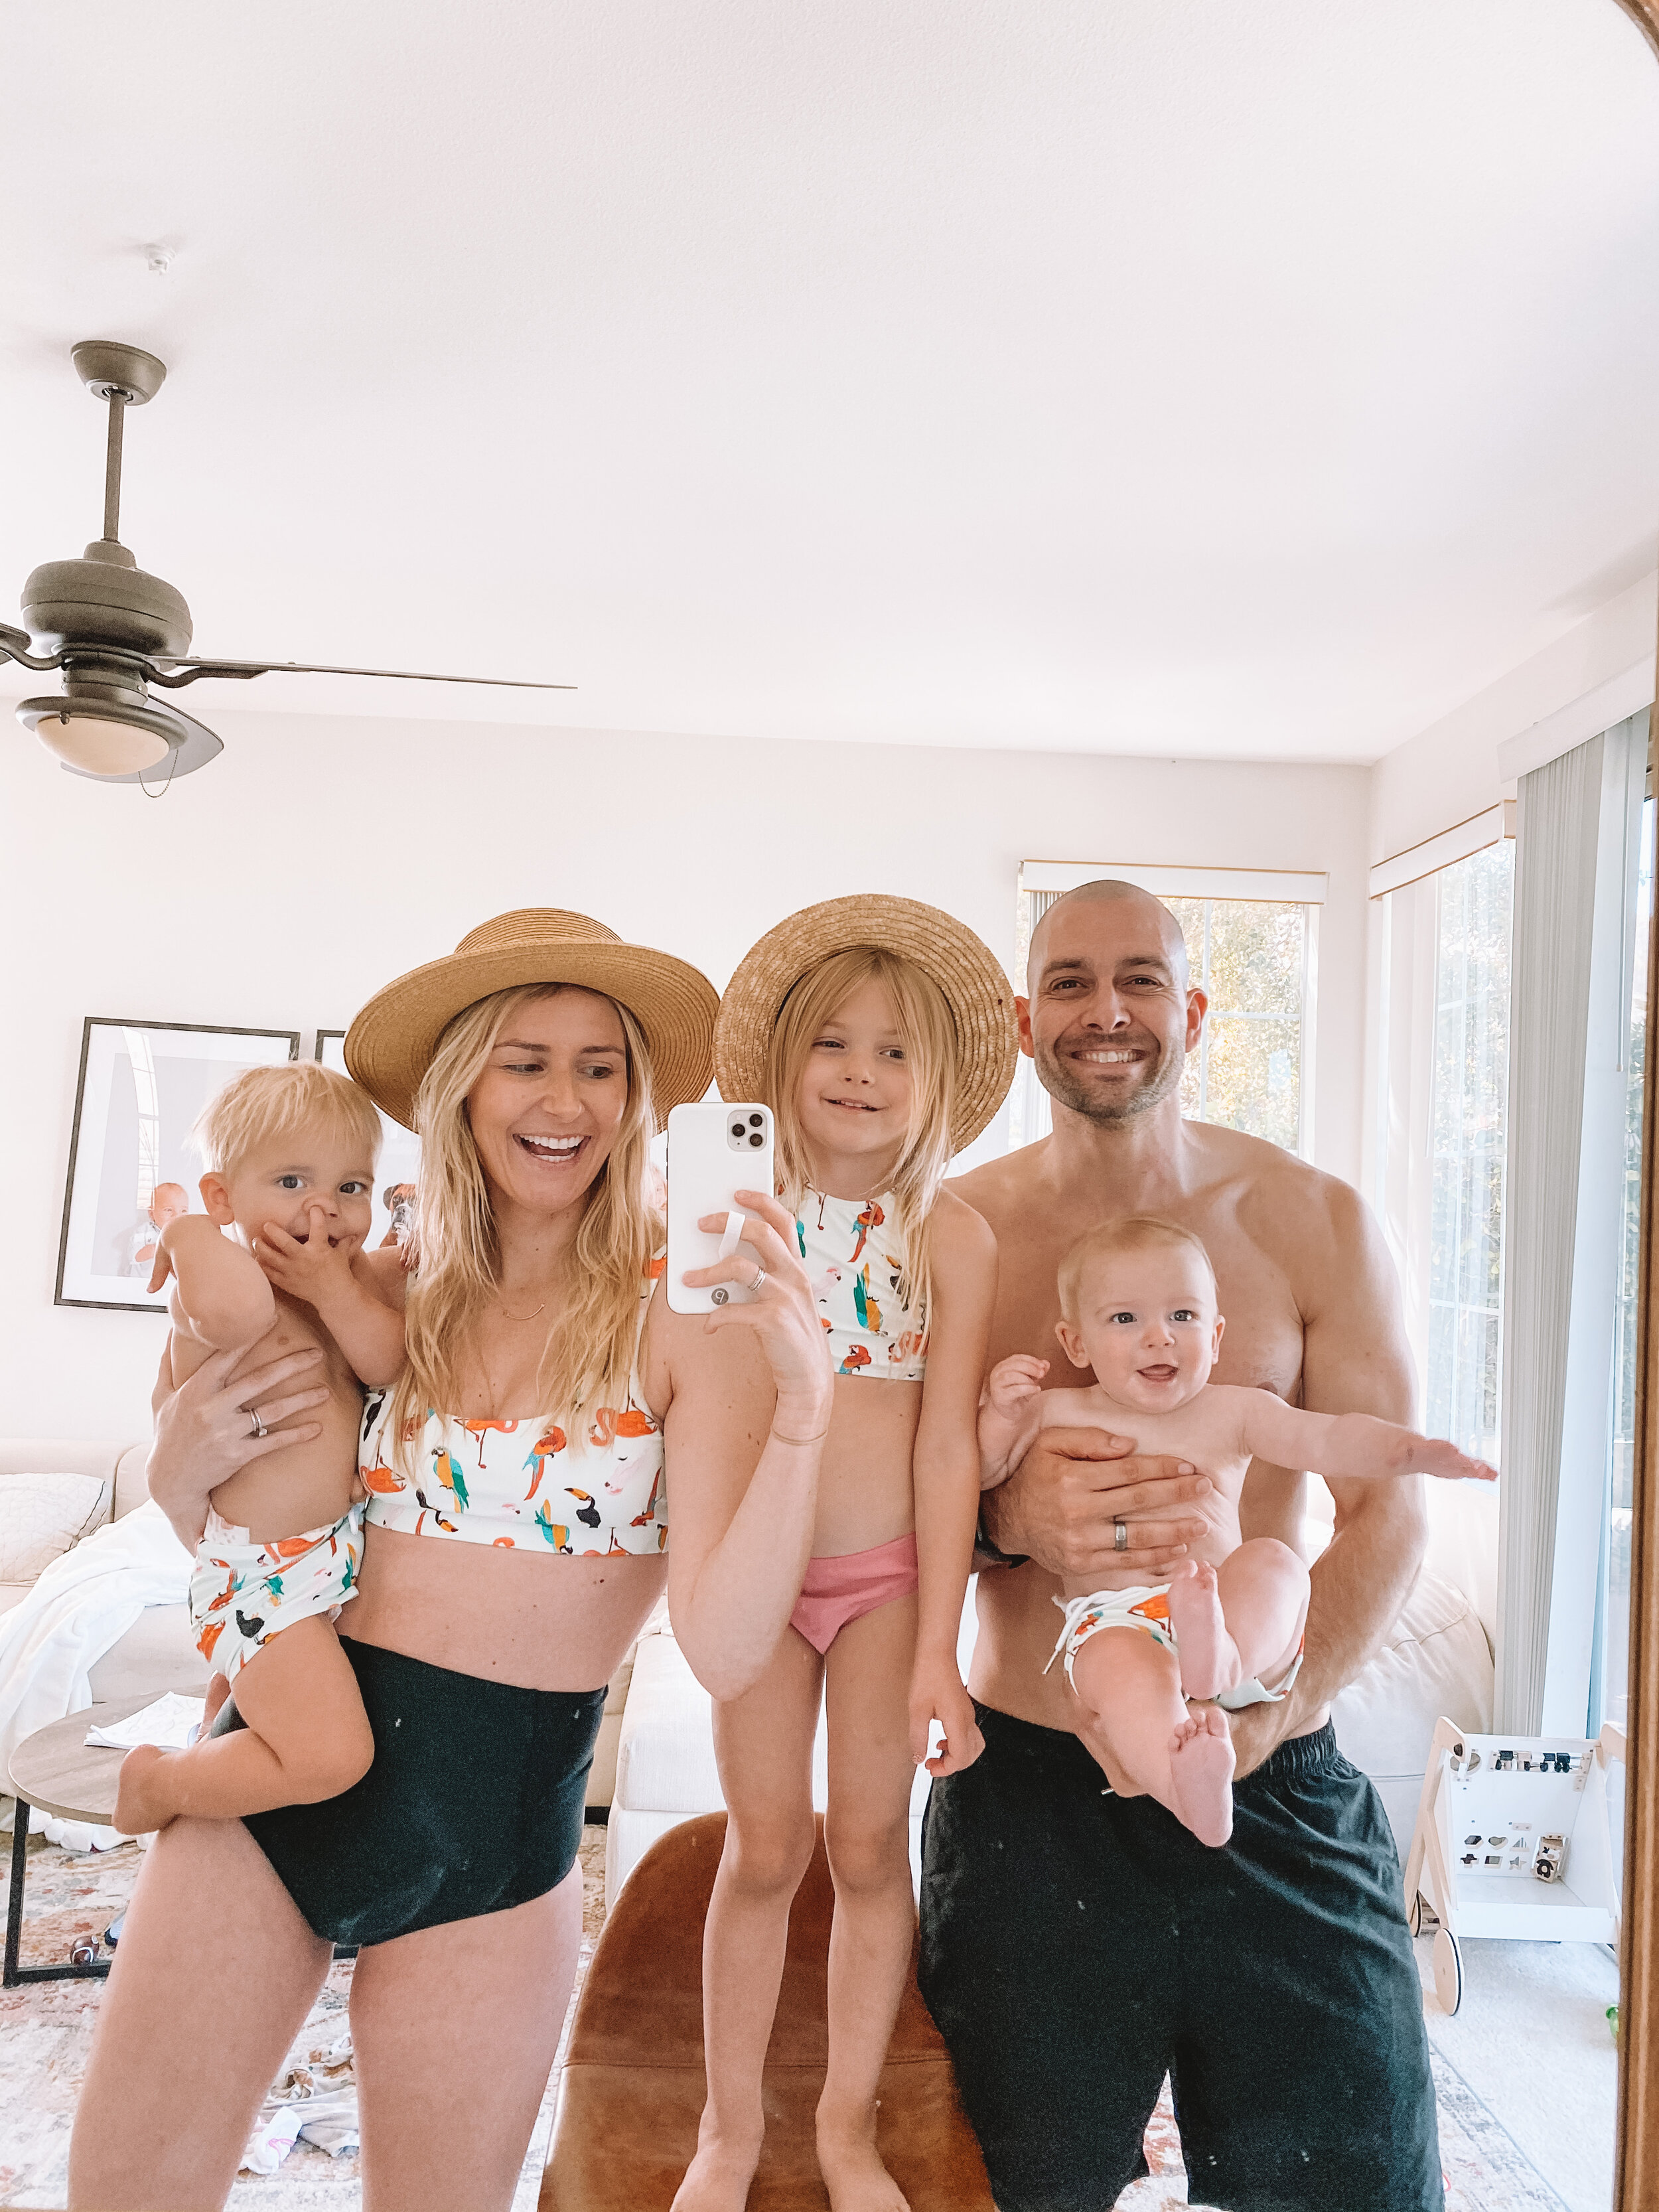 Our Top 5 Baby Boy Online Swimsuit Brands — The Overwhelmed Mommy Blog